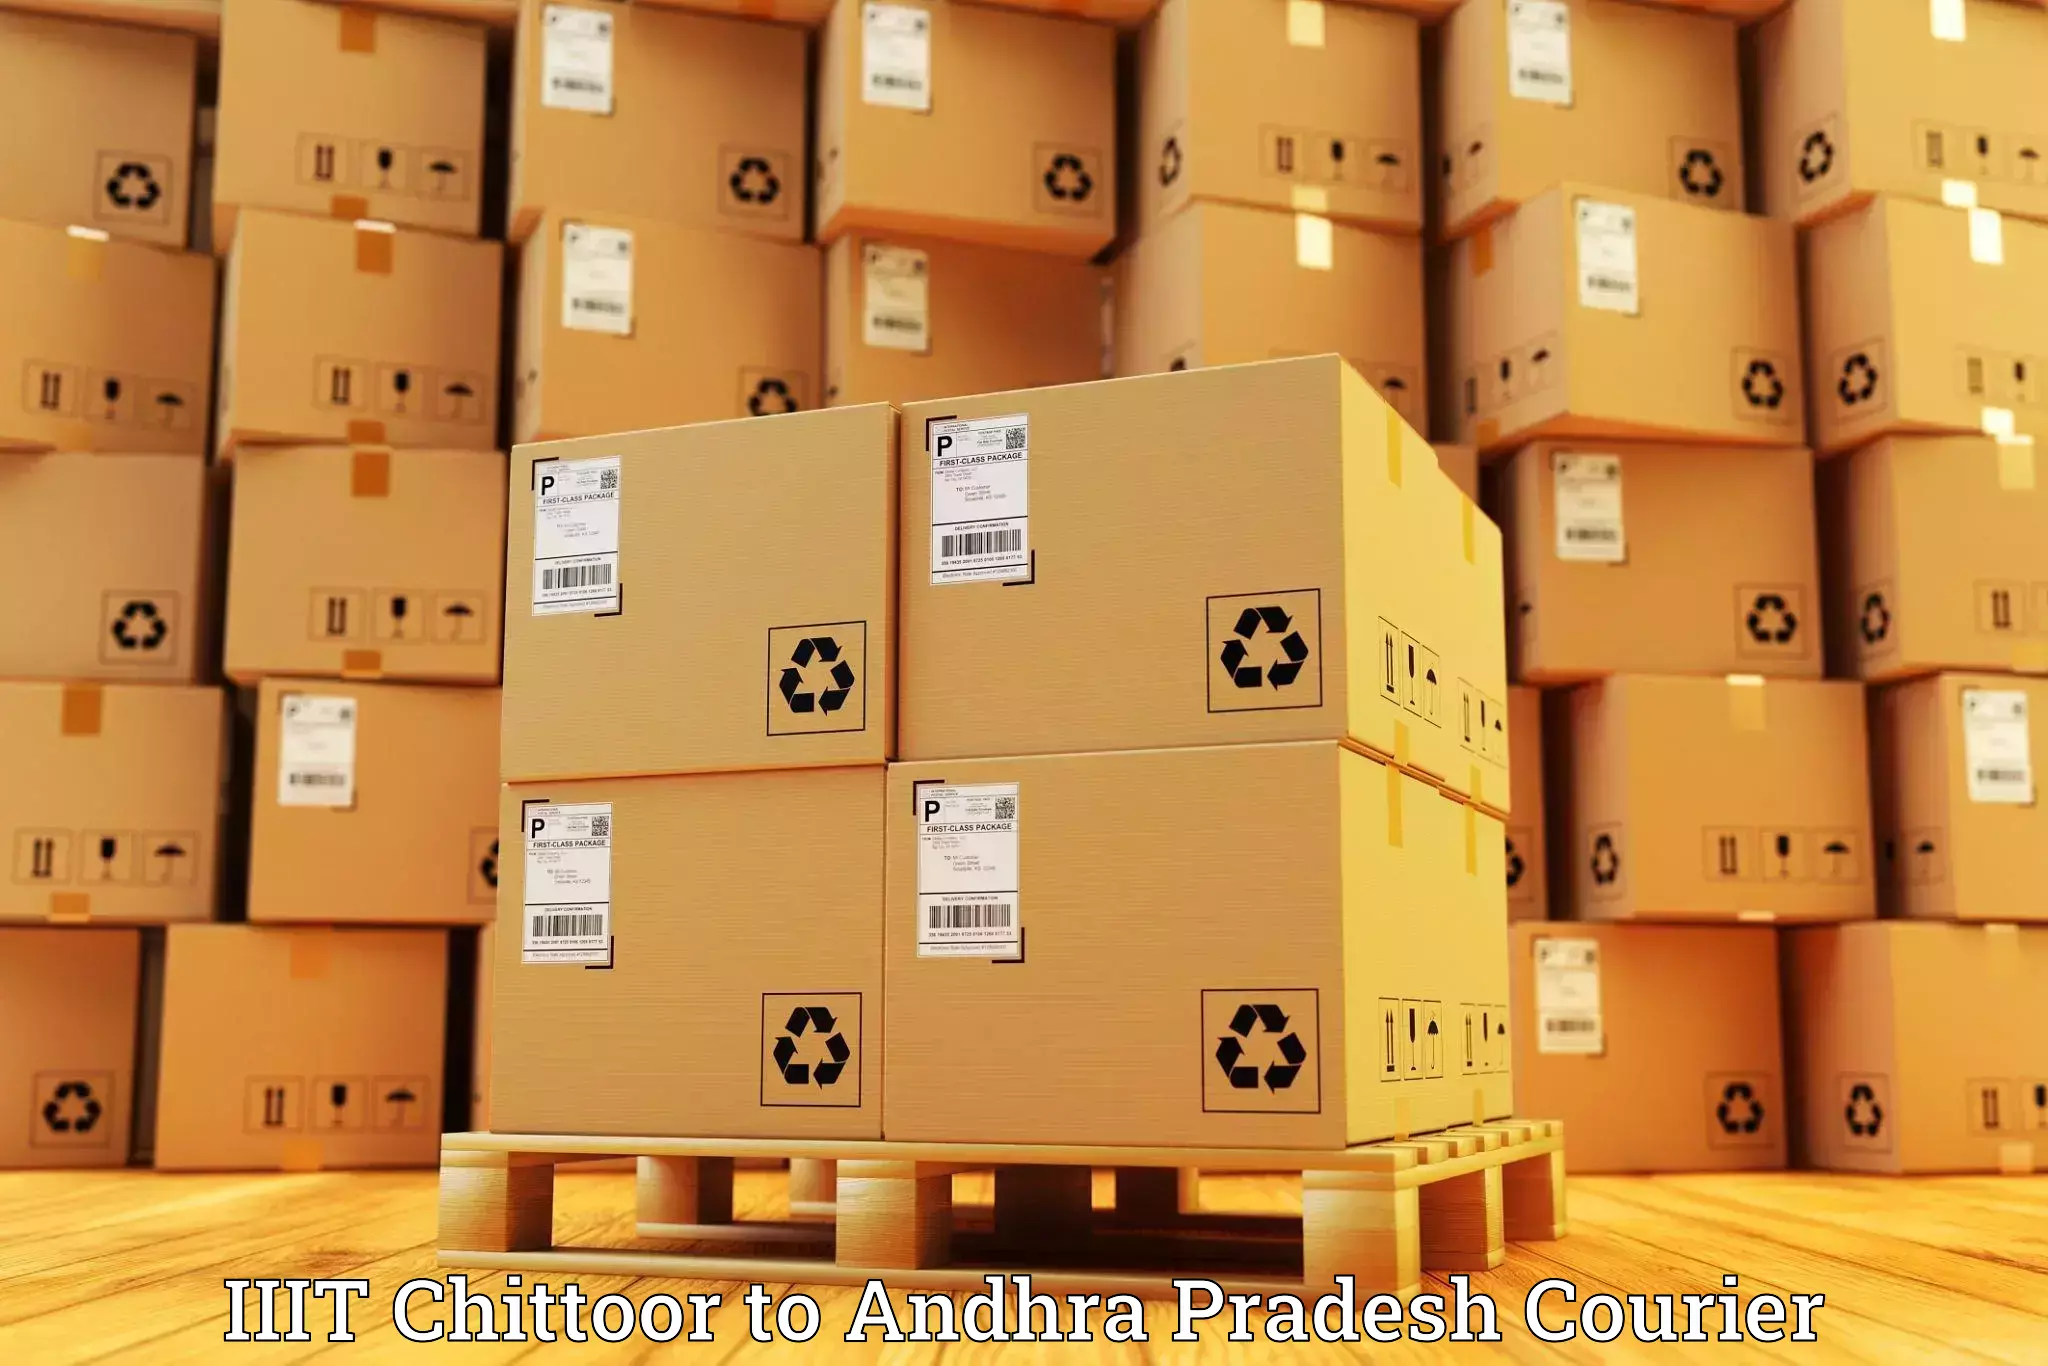 Round-the-clock parcel delivery in IIIT Chittoor to Gudur